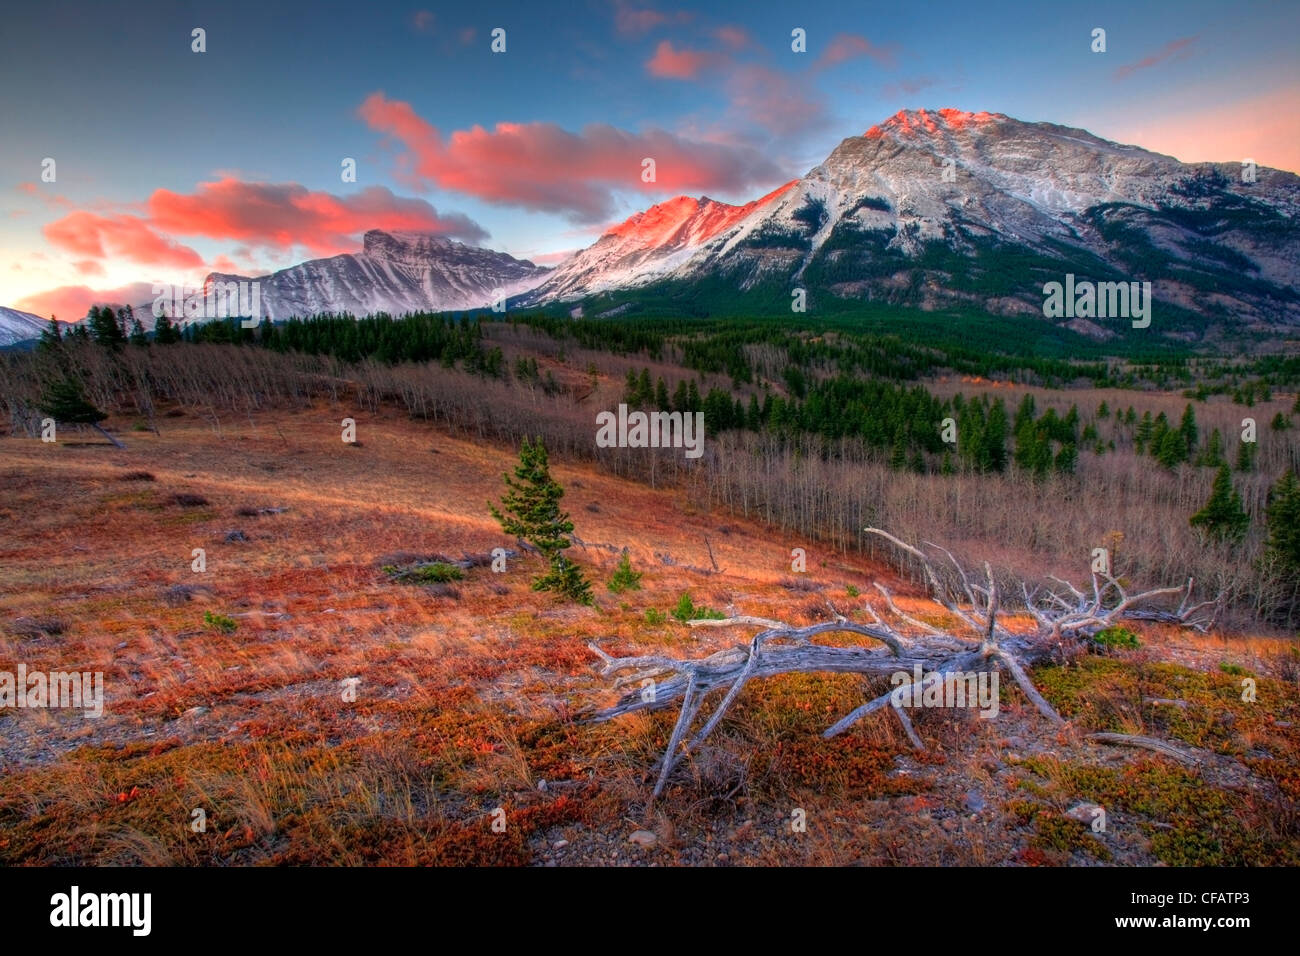 Sunrise and alpenglow above Crowsnest Pass on the border of Alberta and British Columbia, Canada Stock Photo